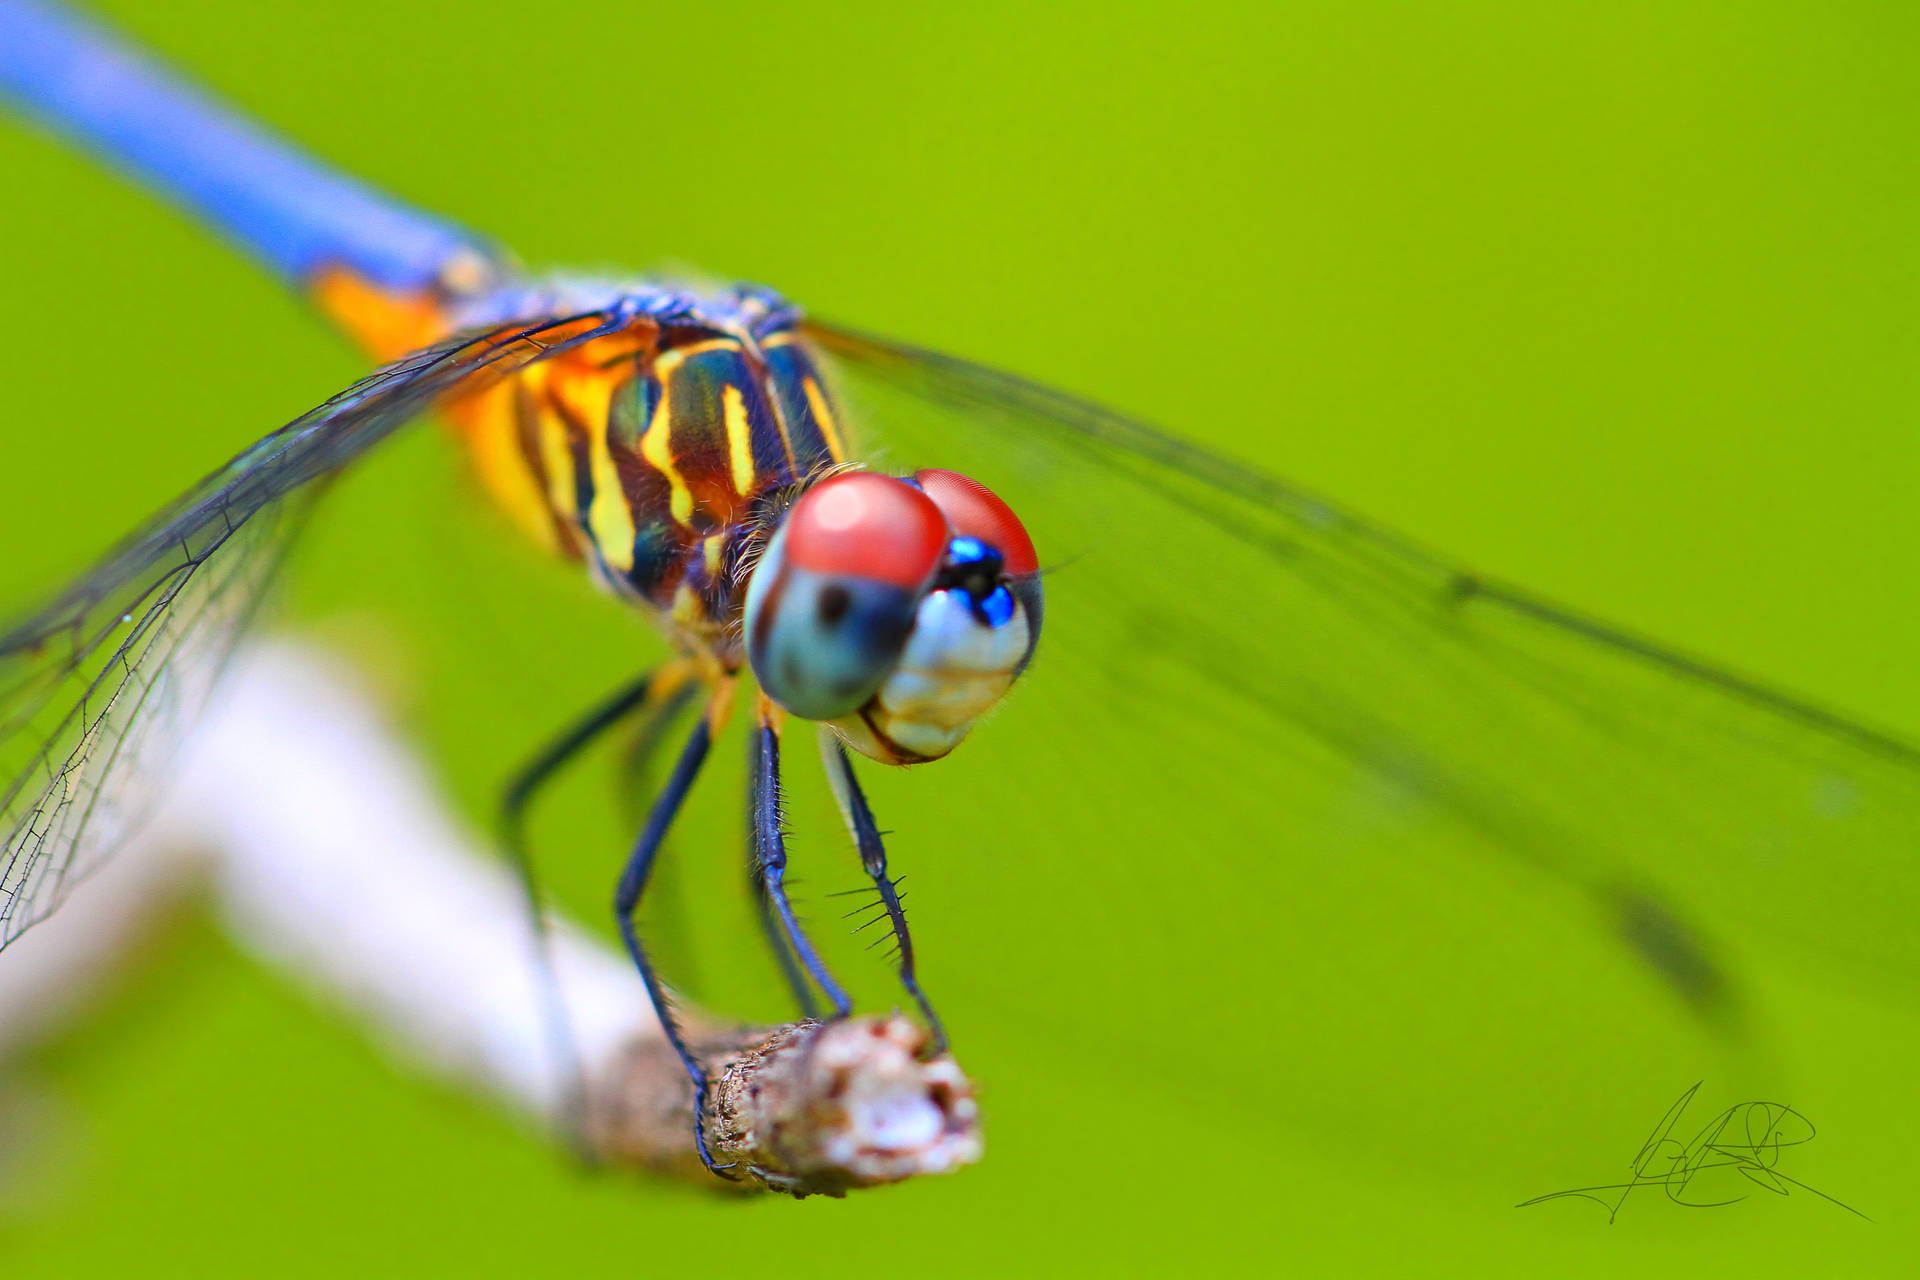 Insect Dragonfly With Colorful Body